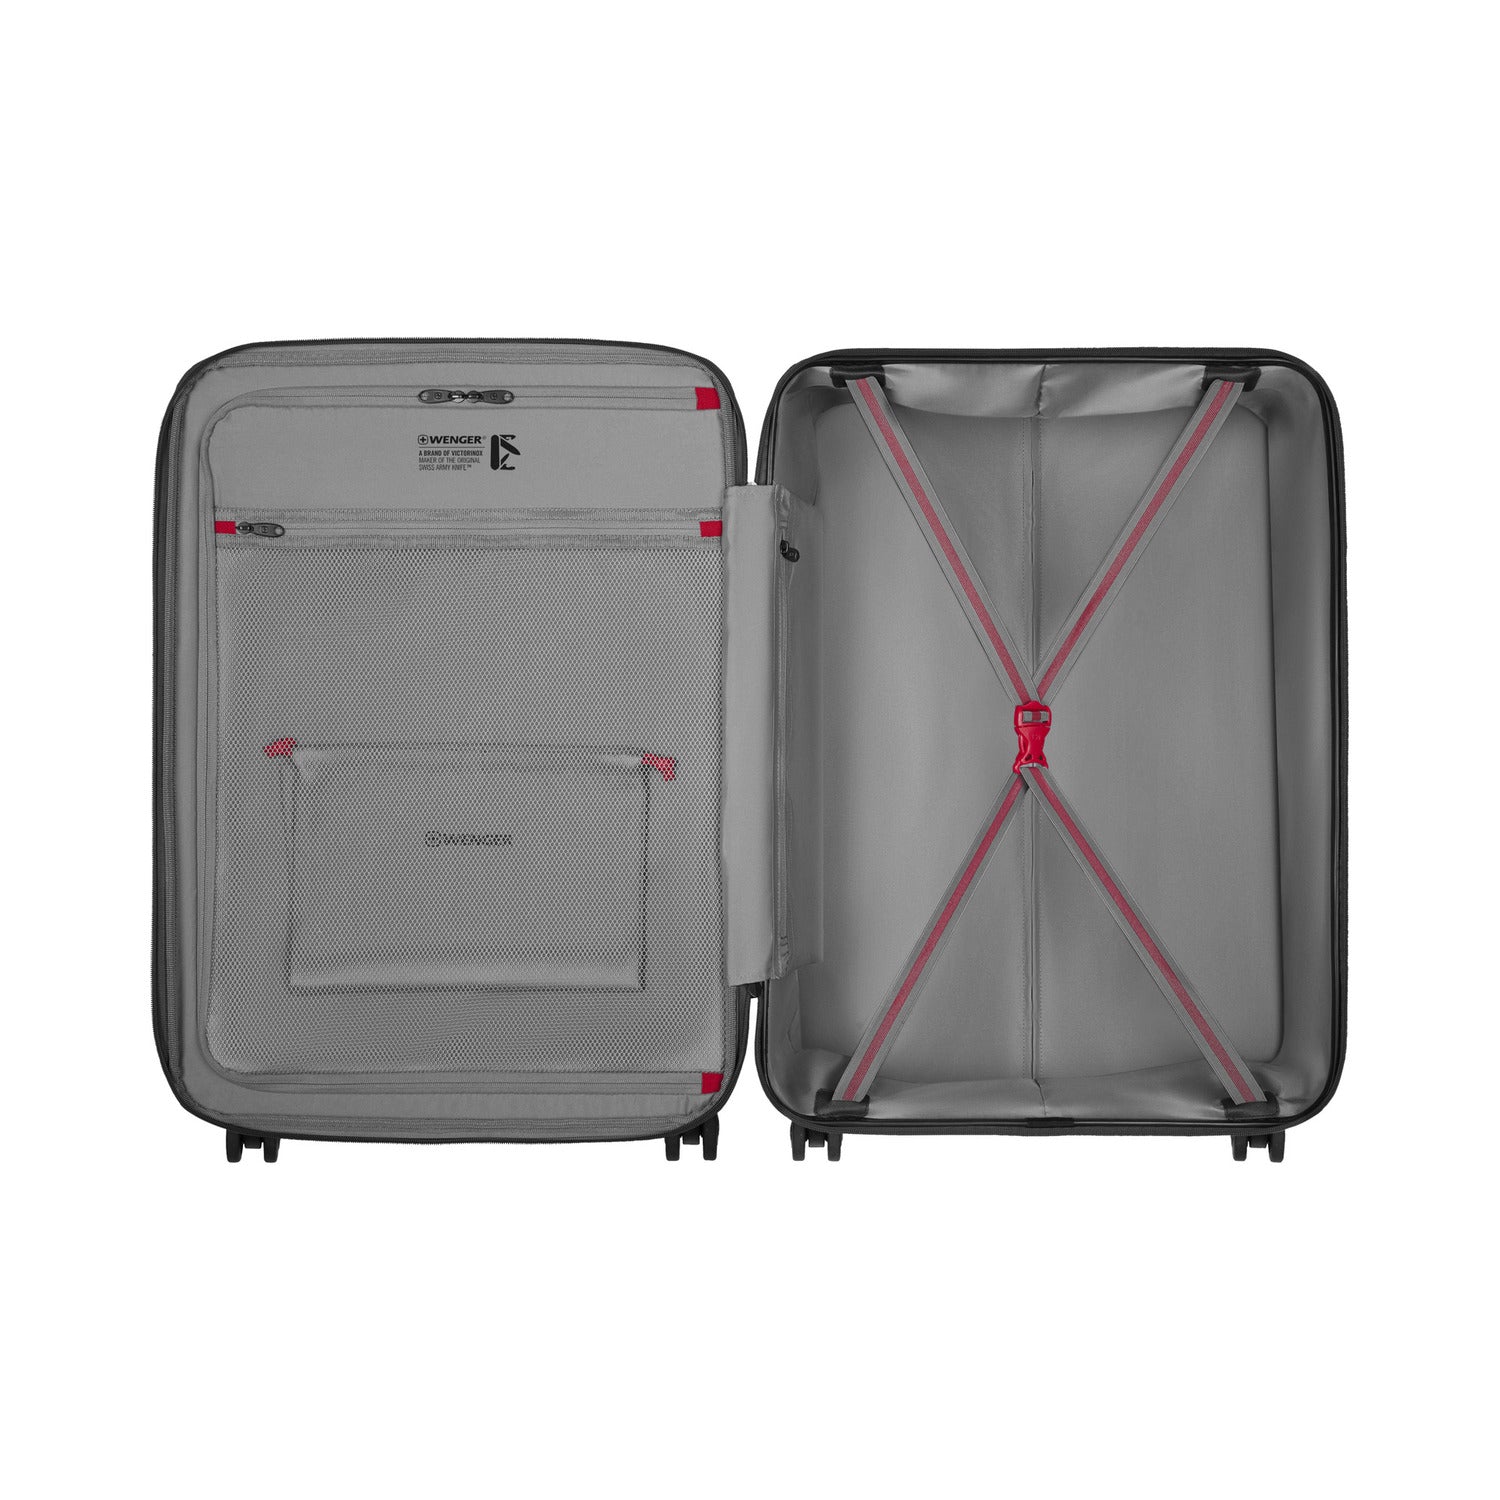 Wenger Motion 3 Piece 54+69+81cm Hardside Expandable Cabin & Check-In Luggage Trolley Set Black